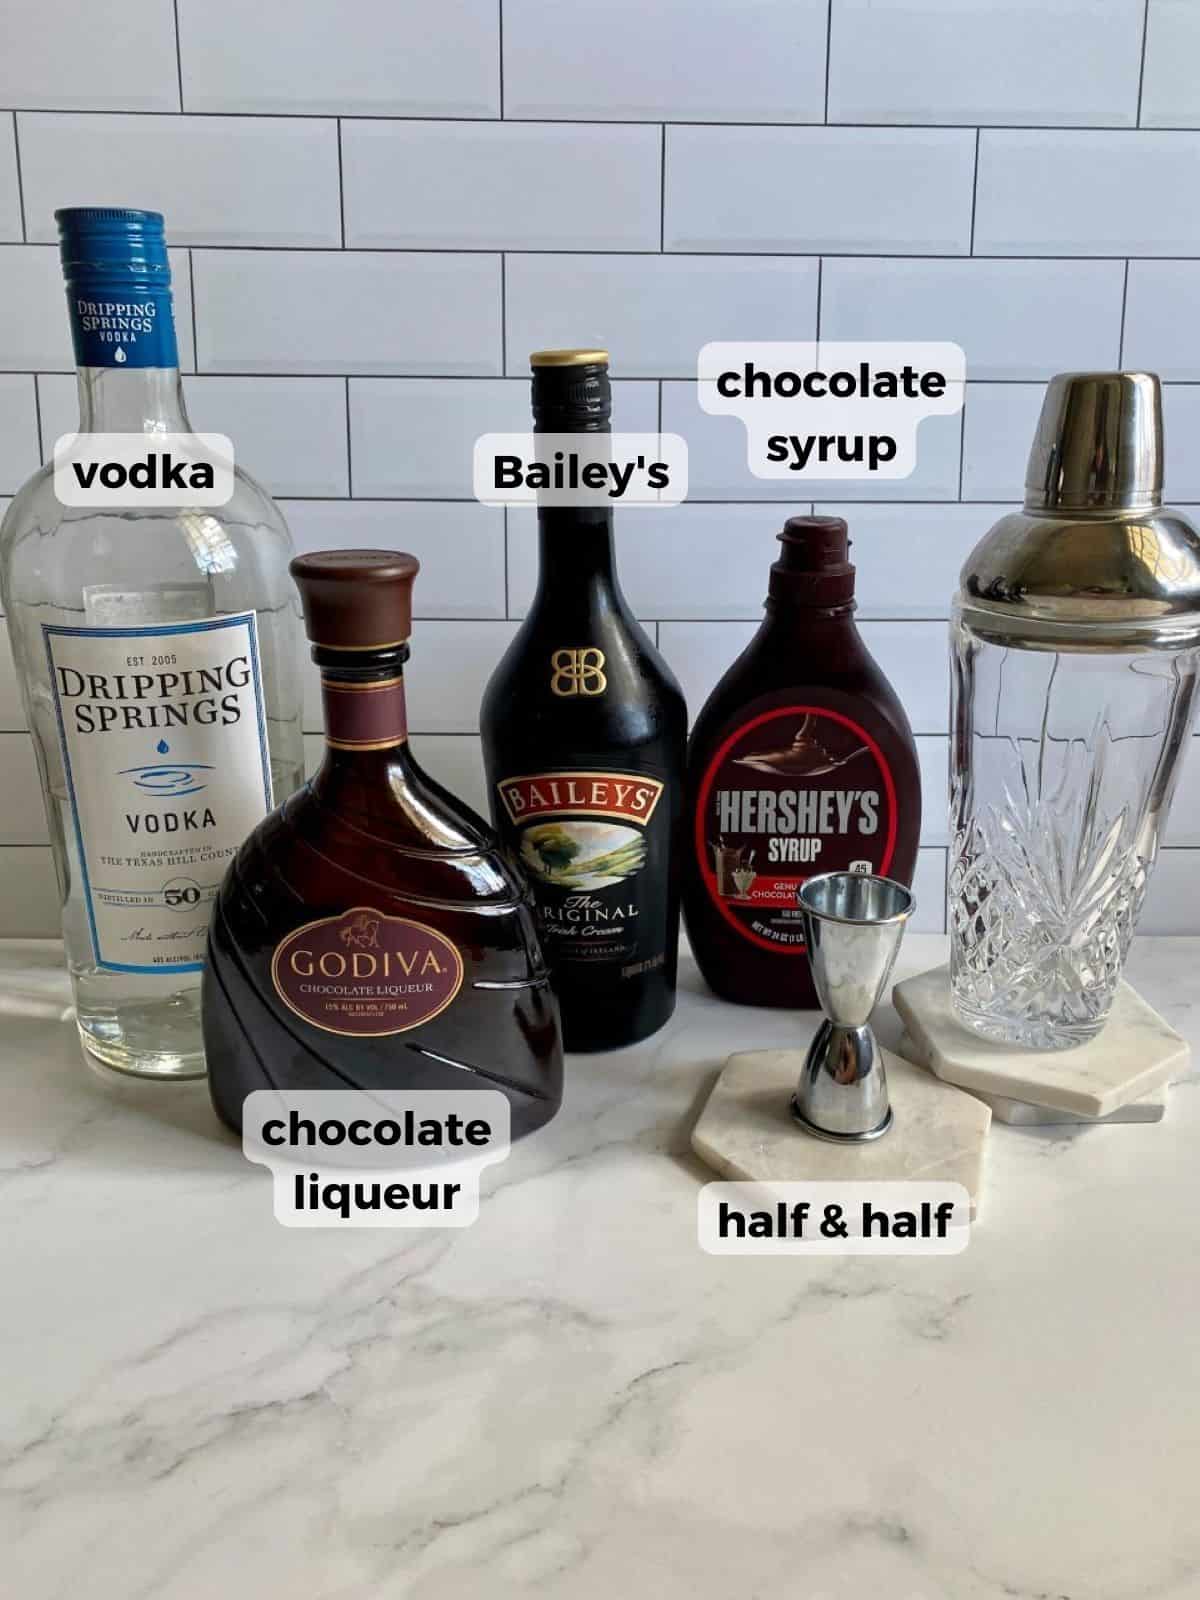 All liquor and liqueur bottles needed to make this martini with a cocktail shaker and jigger on the side.